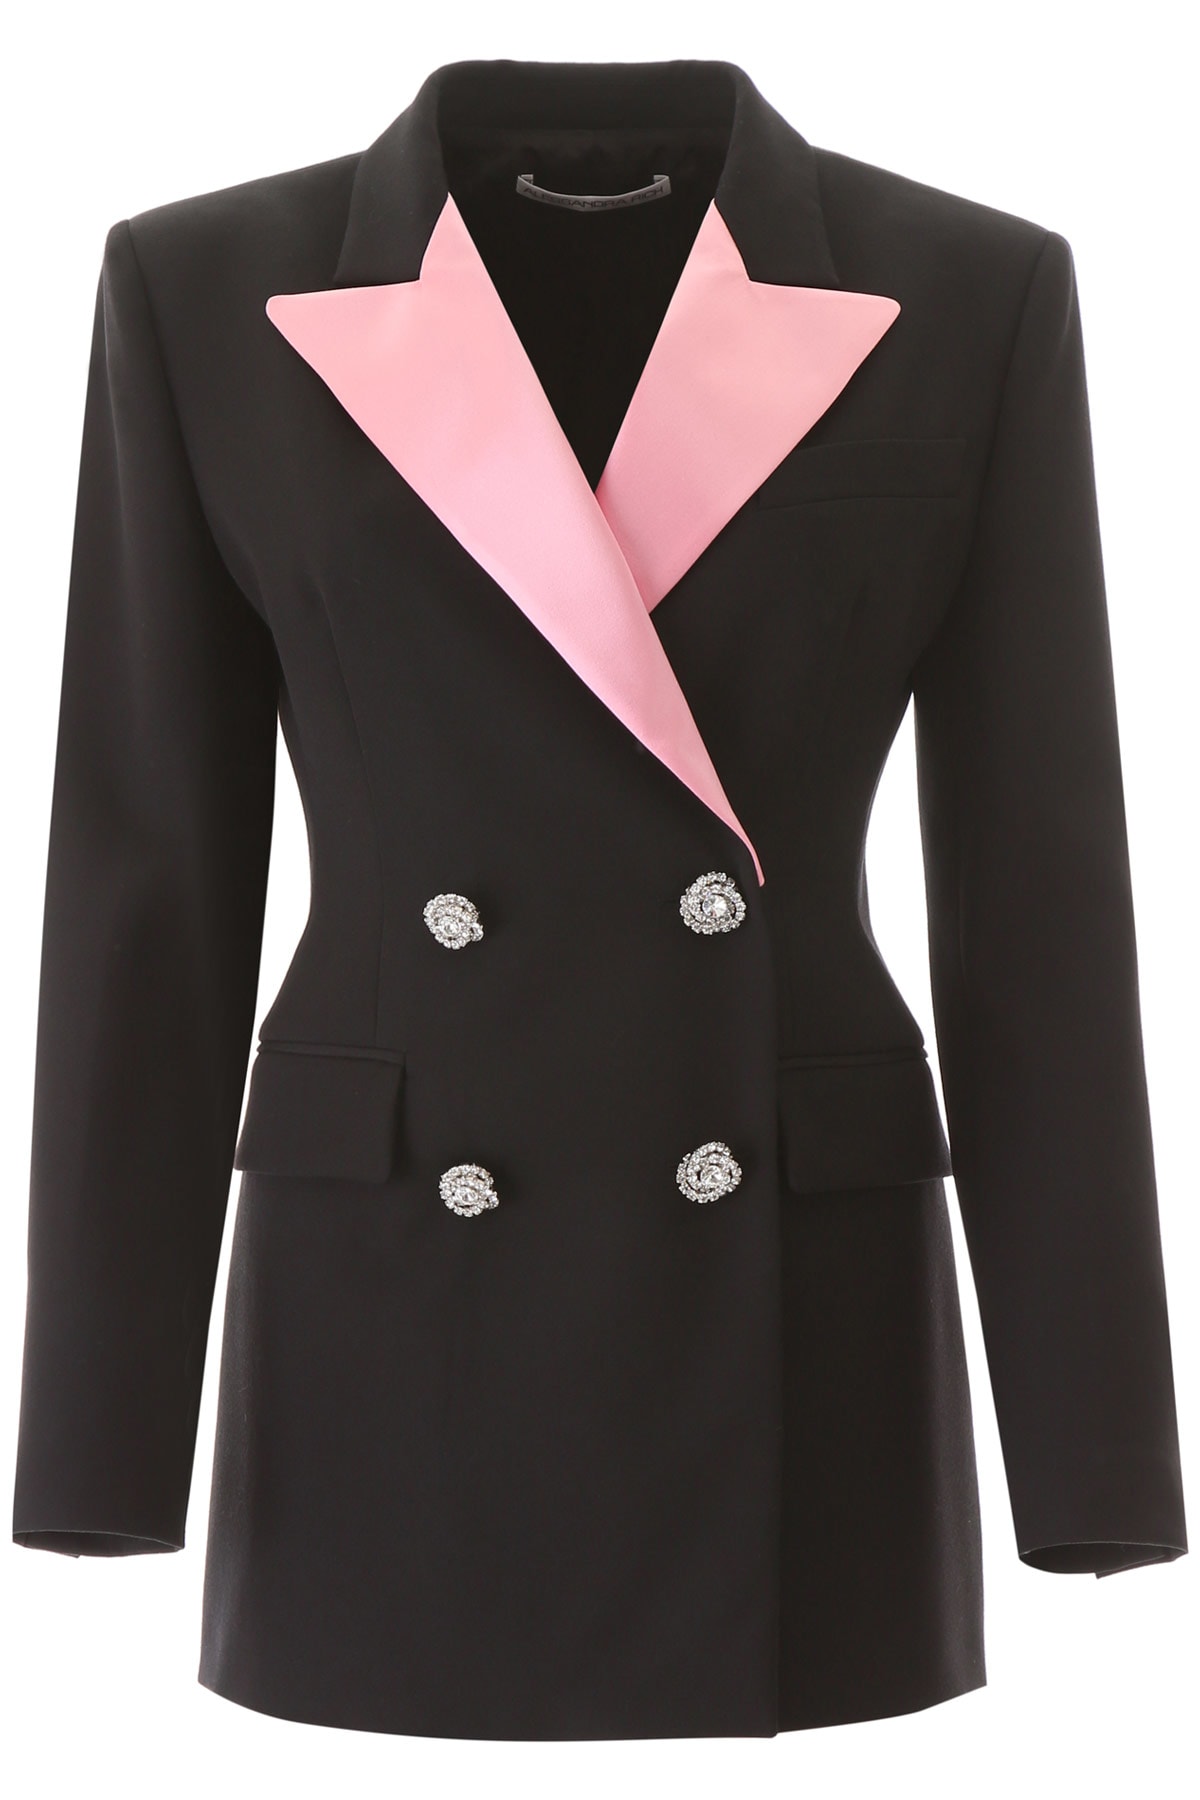 ALESSANDRA RICH JACKET WITH PINK LAPEL,11331368